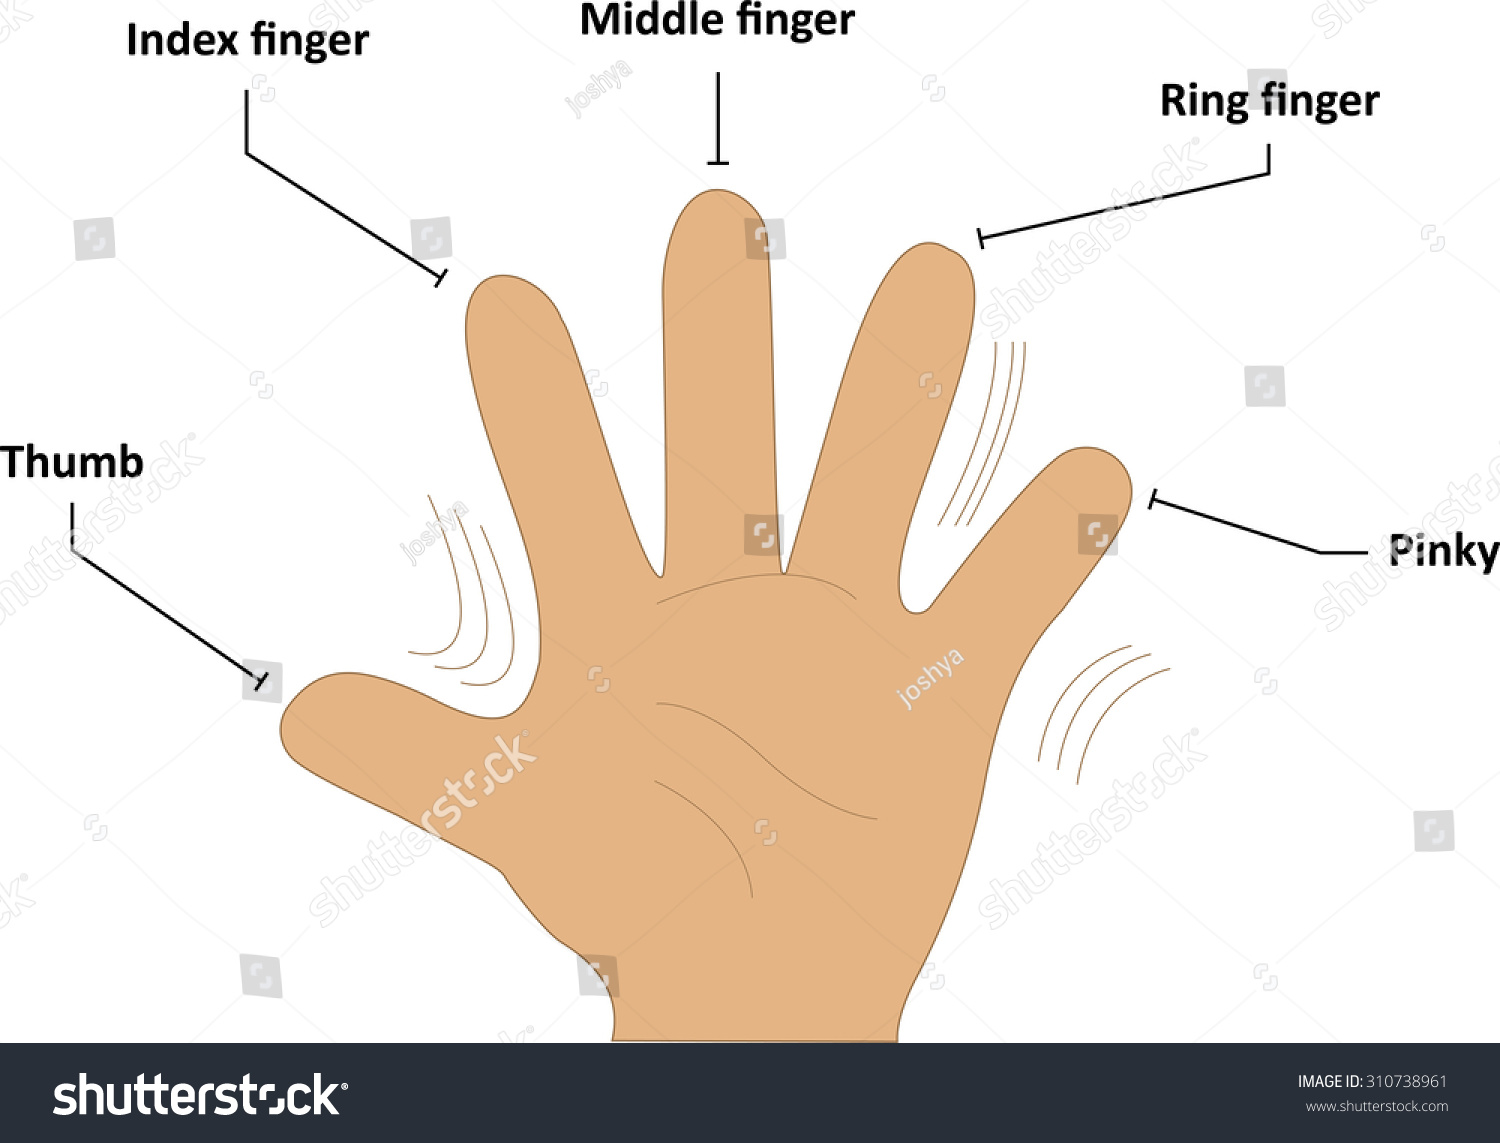 Names of fingers in English